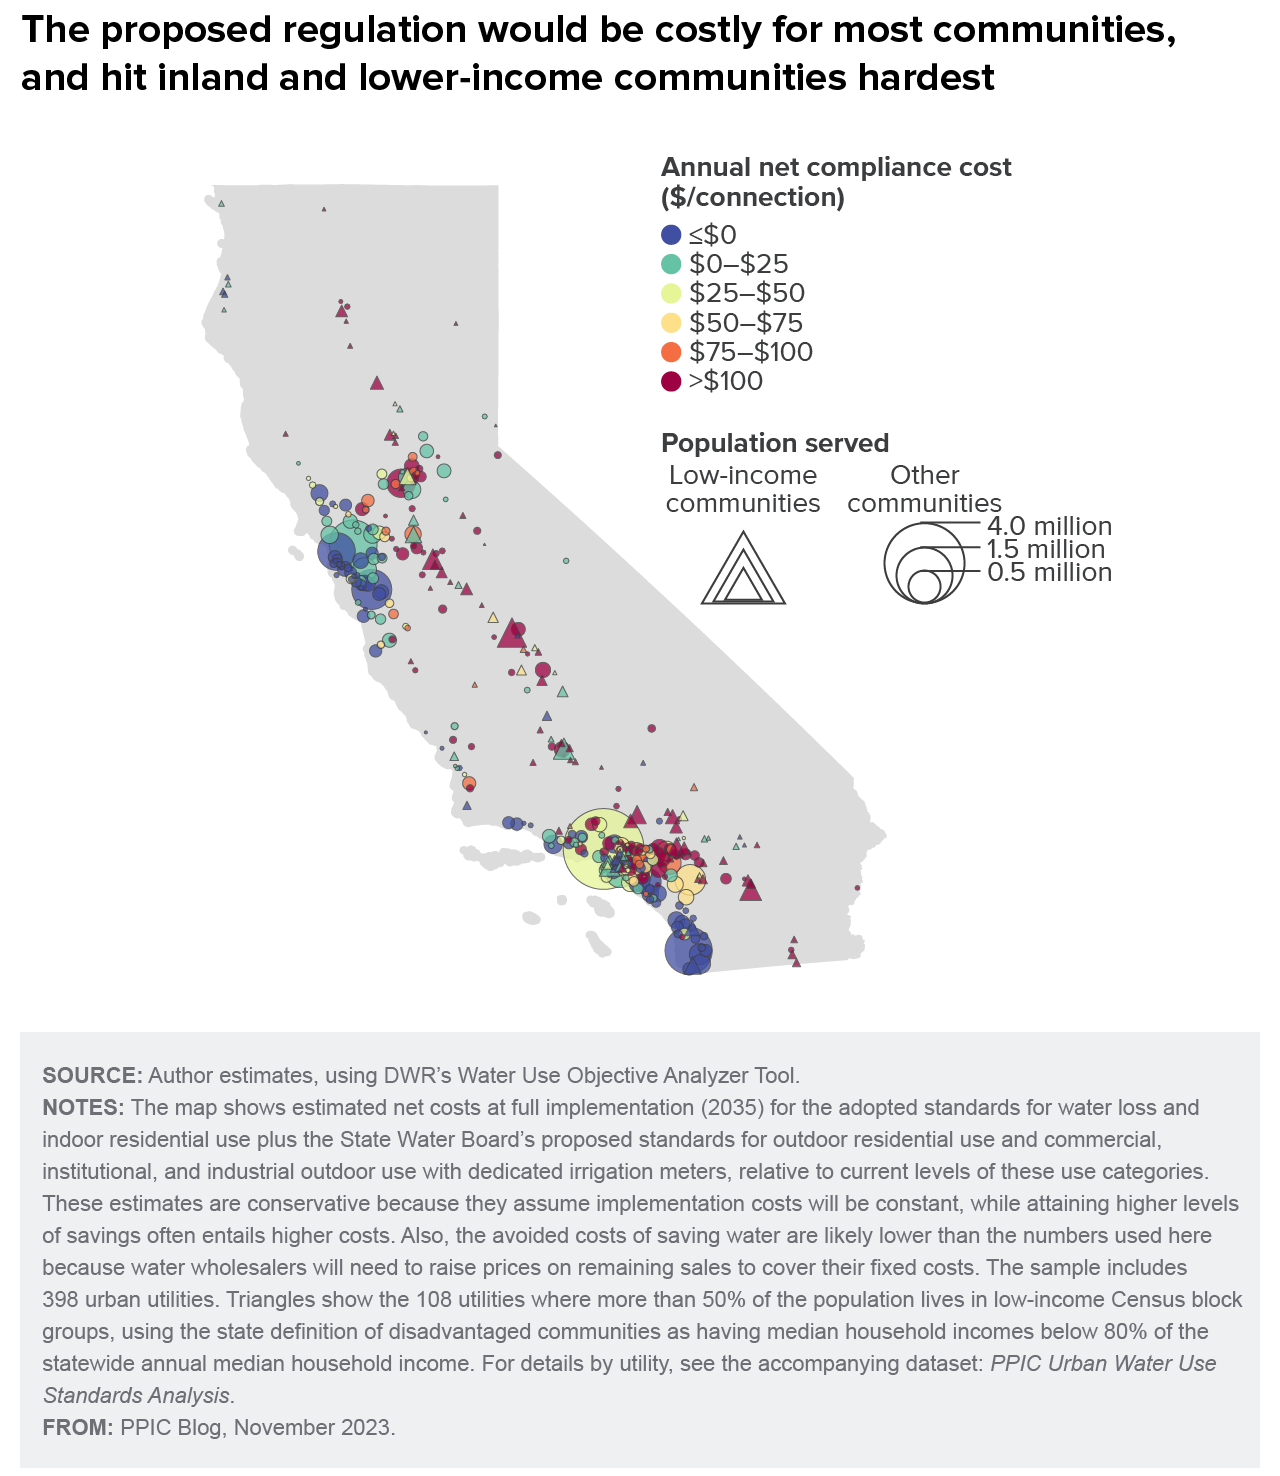 map - The proposed regulation would be costly for most communities, and hit inland and lower-income communities hardest